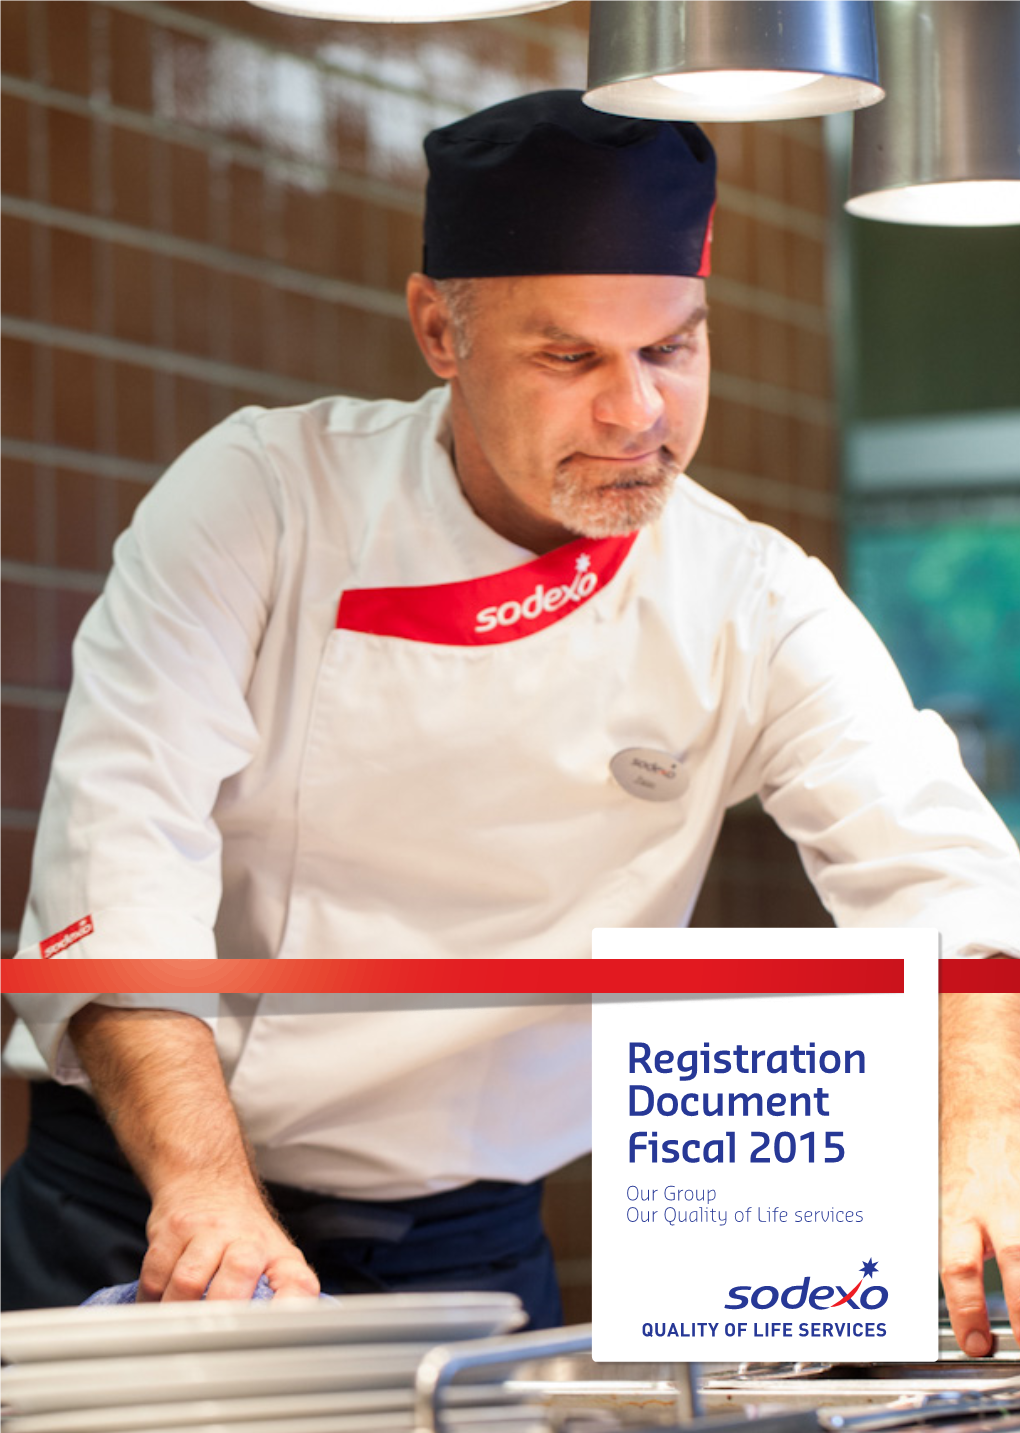 Registration Document Fiscal 2015 Our Group Our Quality of Life Services 1